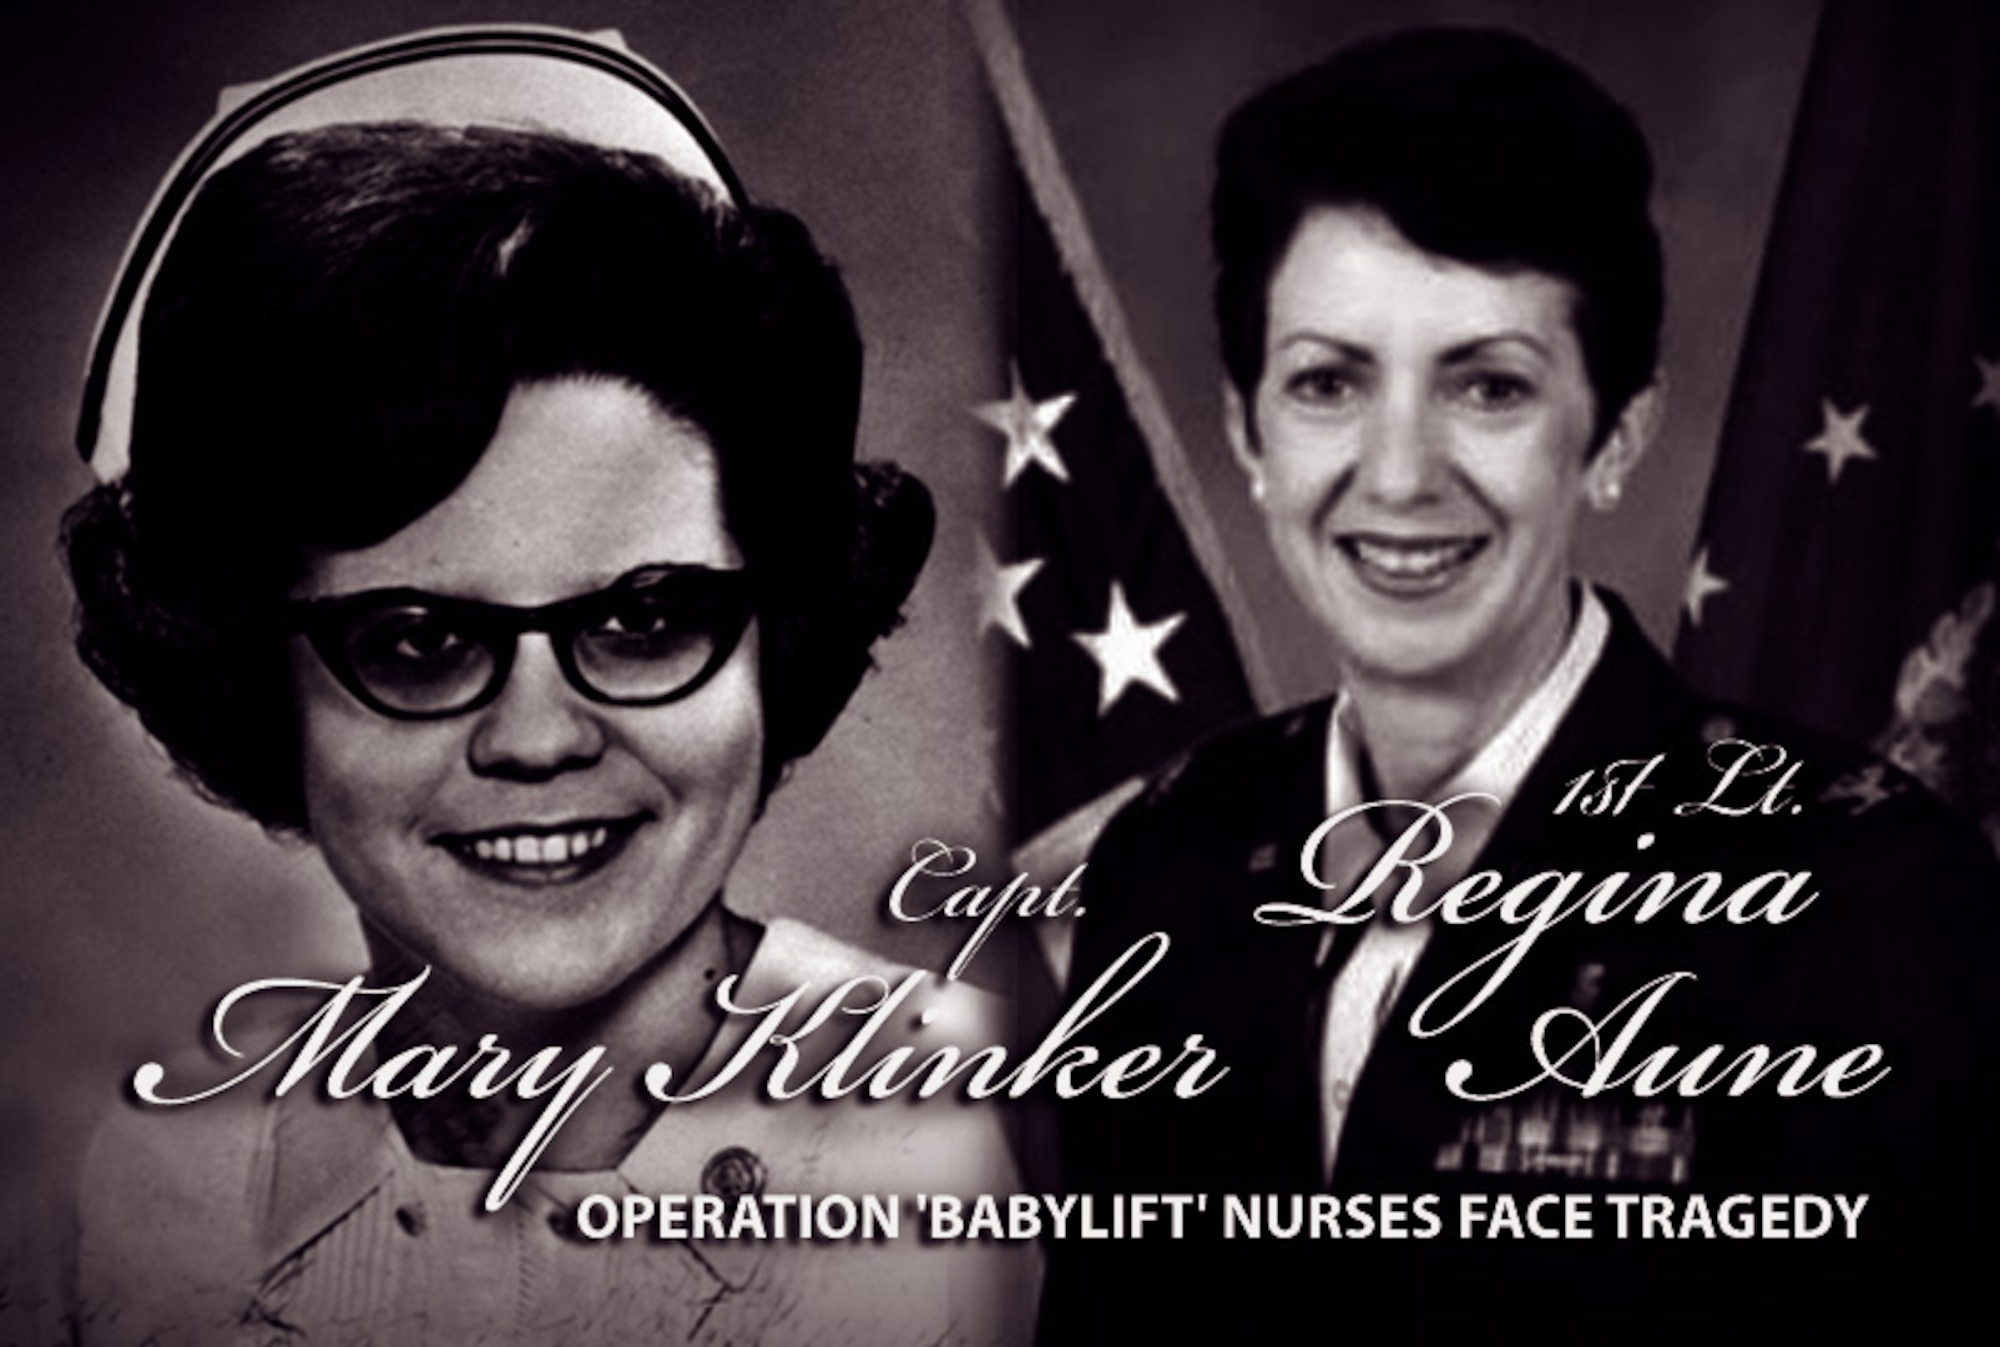 Two nurses face tragedy during Operation "Babylift" at the end of Vietnam. (Graphic by Sylvia Saab)